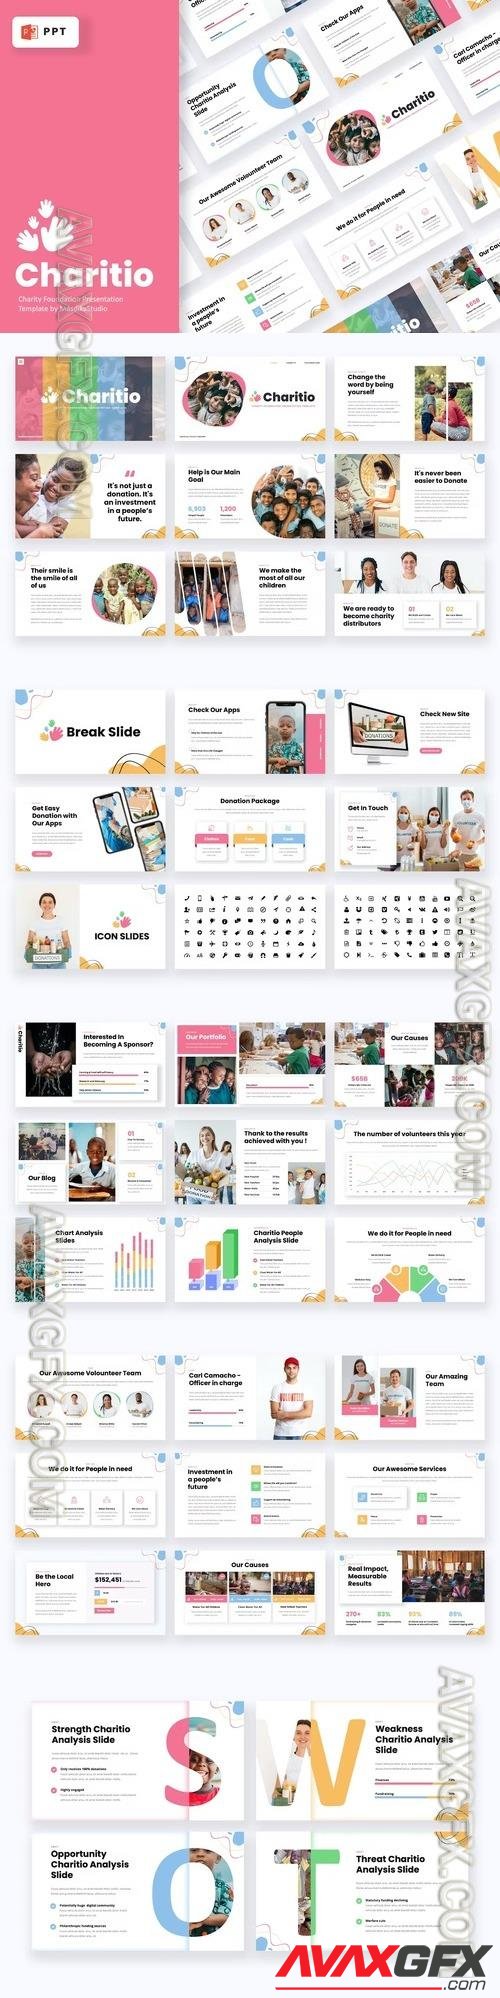 Charitio - Charity Foundation Powerpoint, Keynote Template